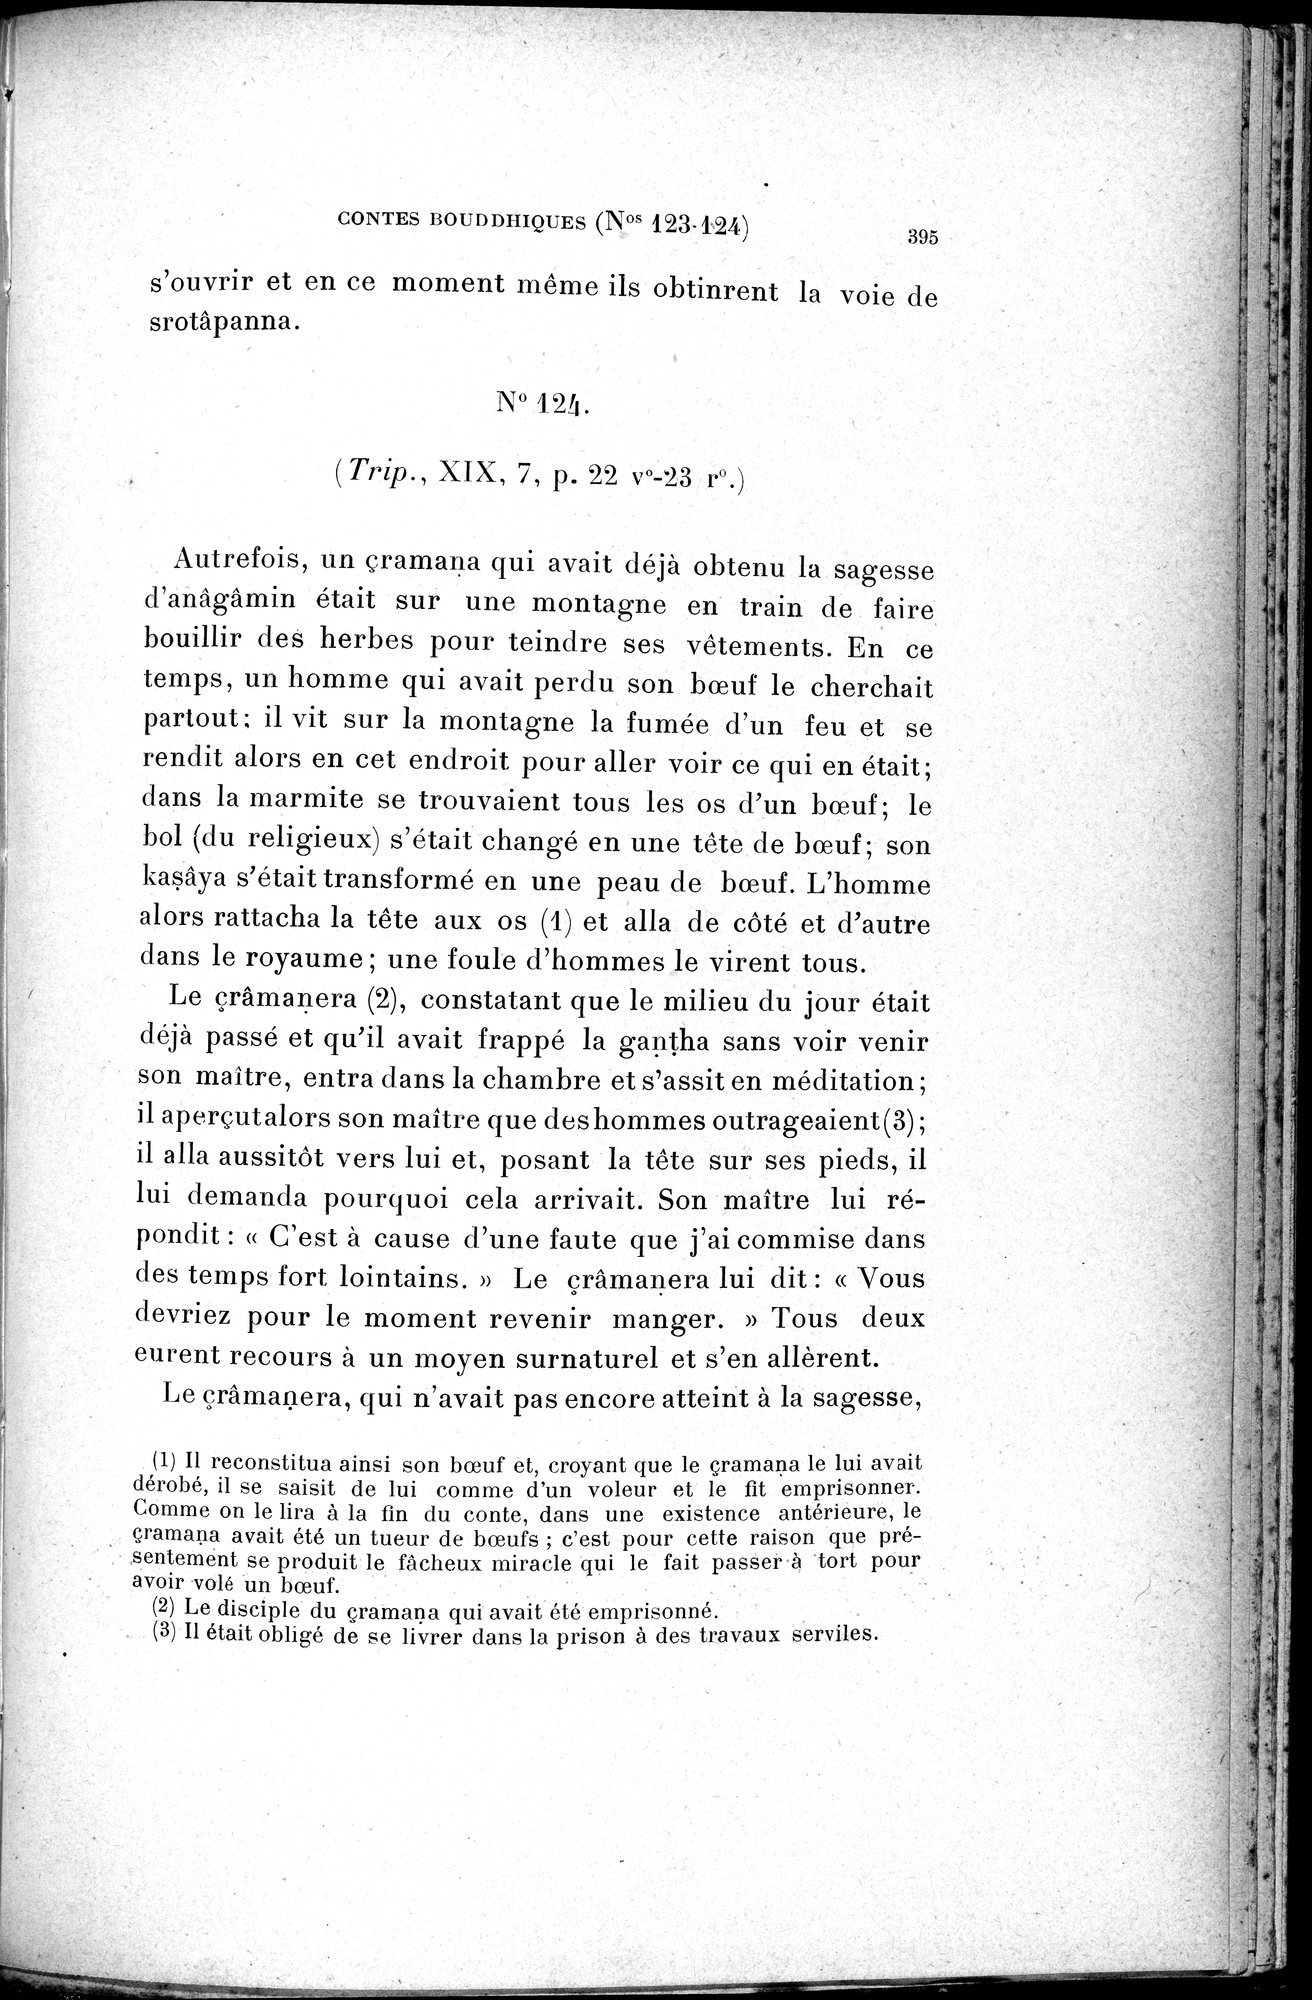 Cinq Cents Contes et Apologues : vol.1 / Page 429 (Grayscale High Resolution Image)